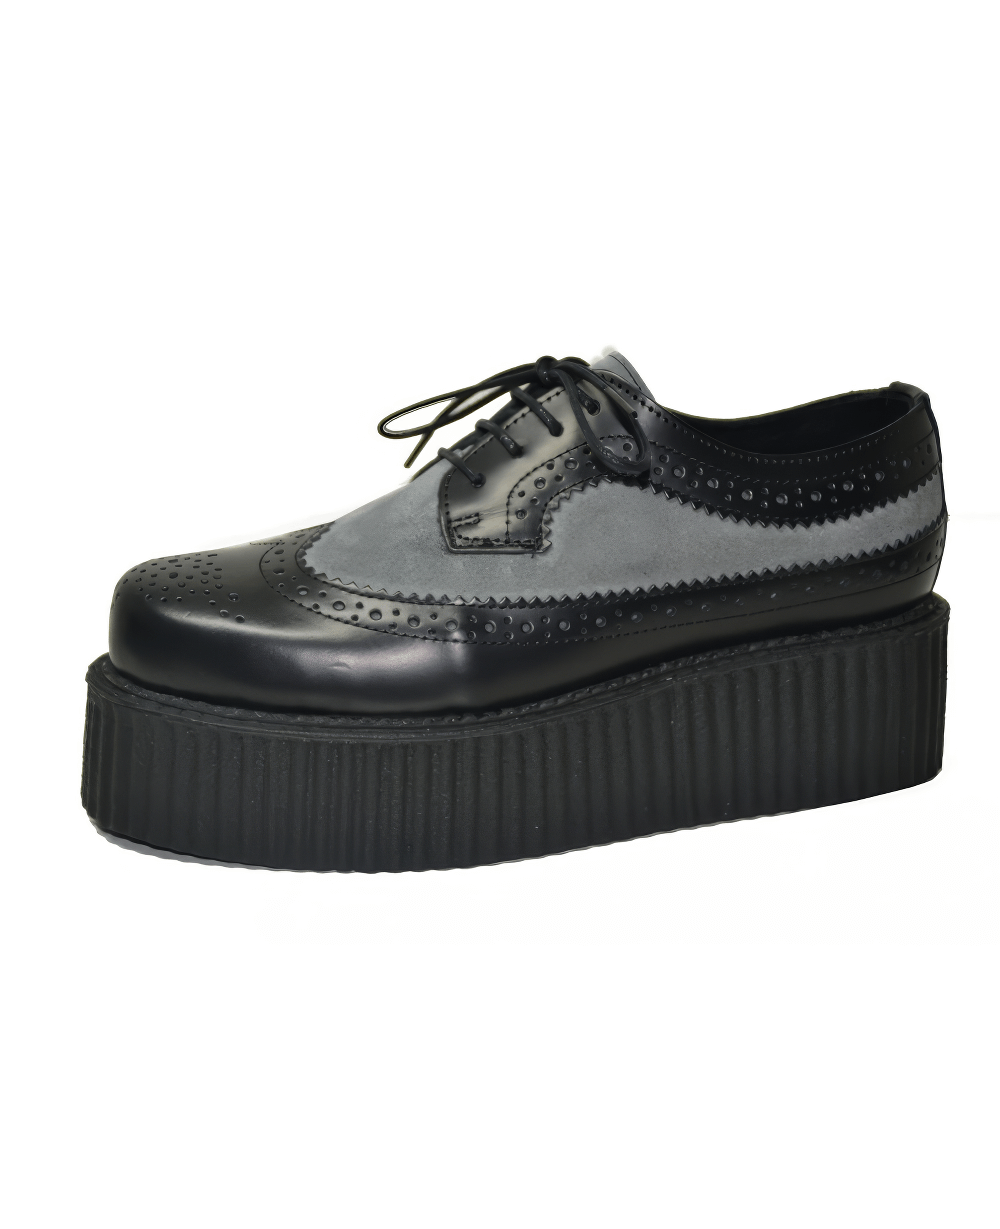 Unisex Black-Gray Suede Lace-Up Platform Creepers